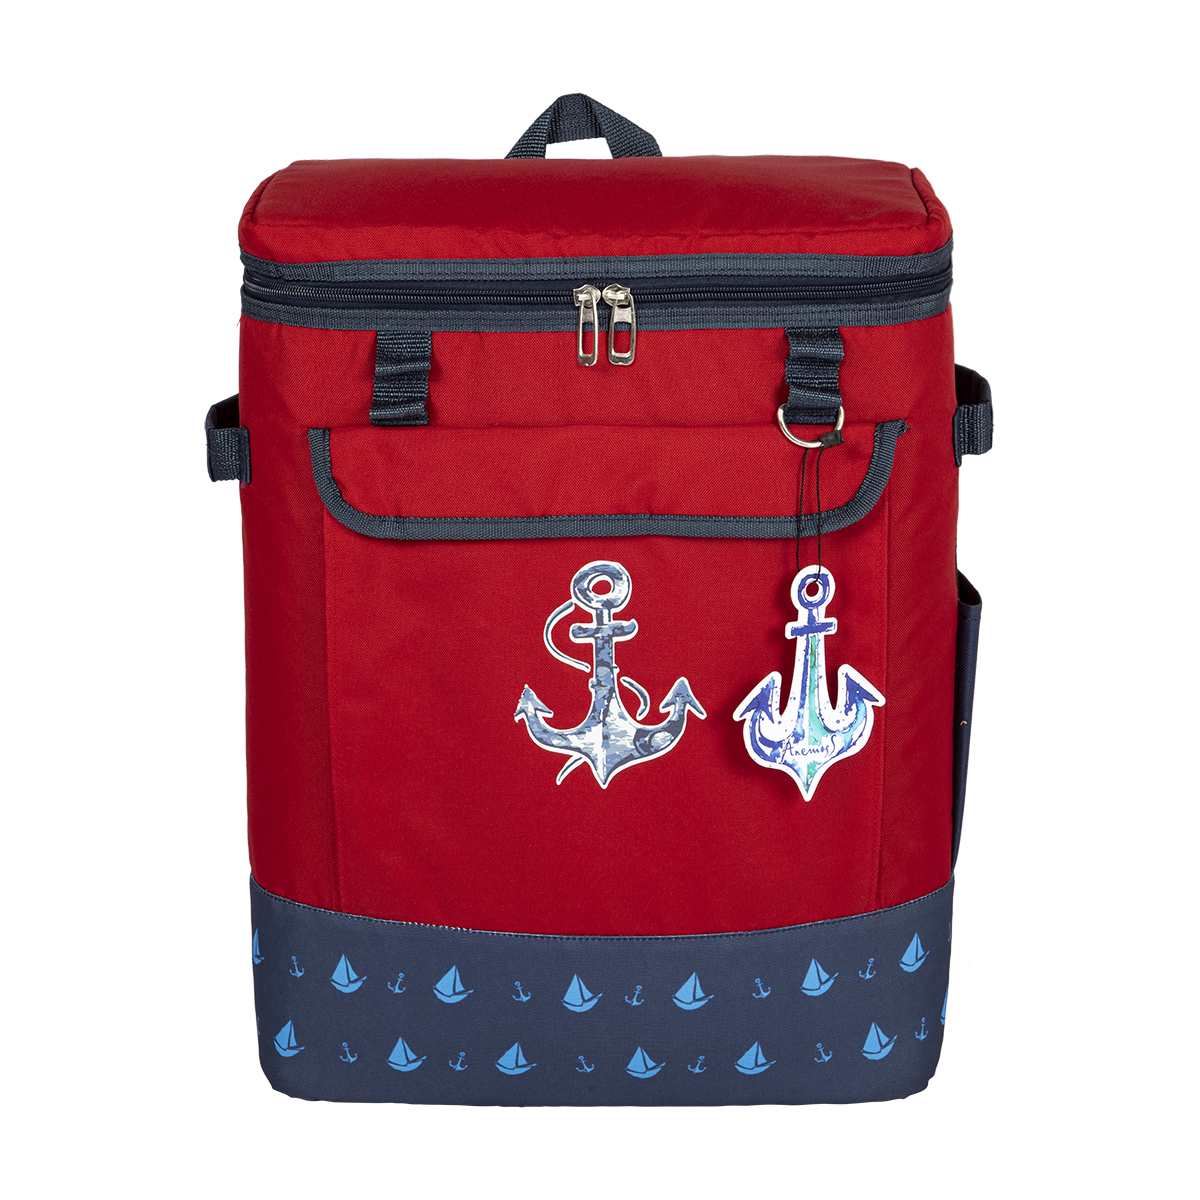 Anemoss anchor insulated cooler backpack